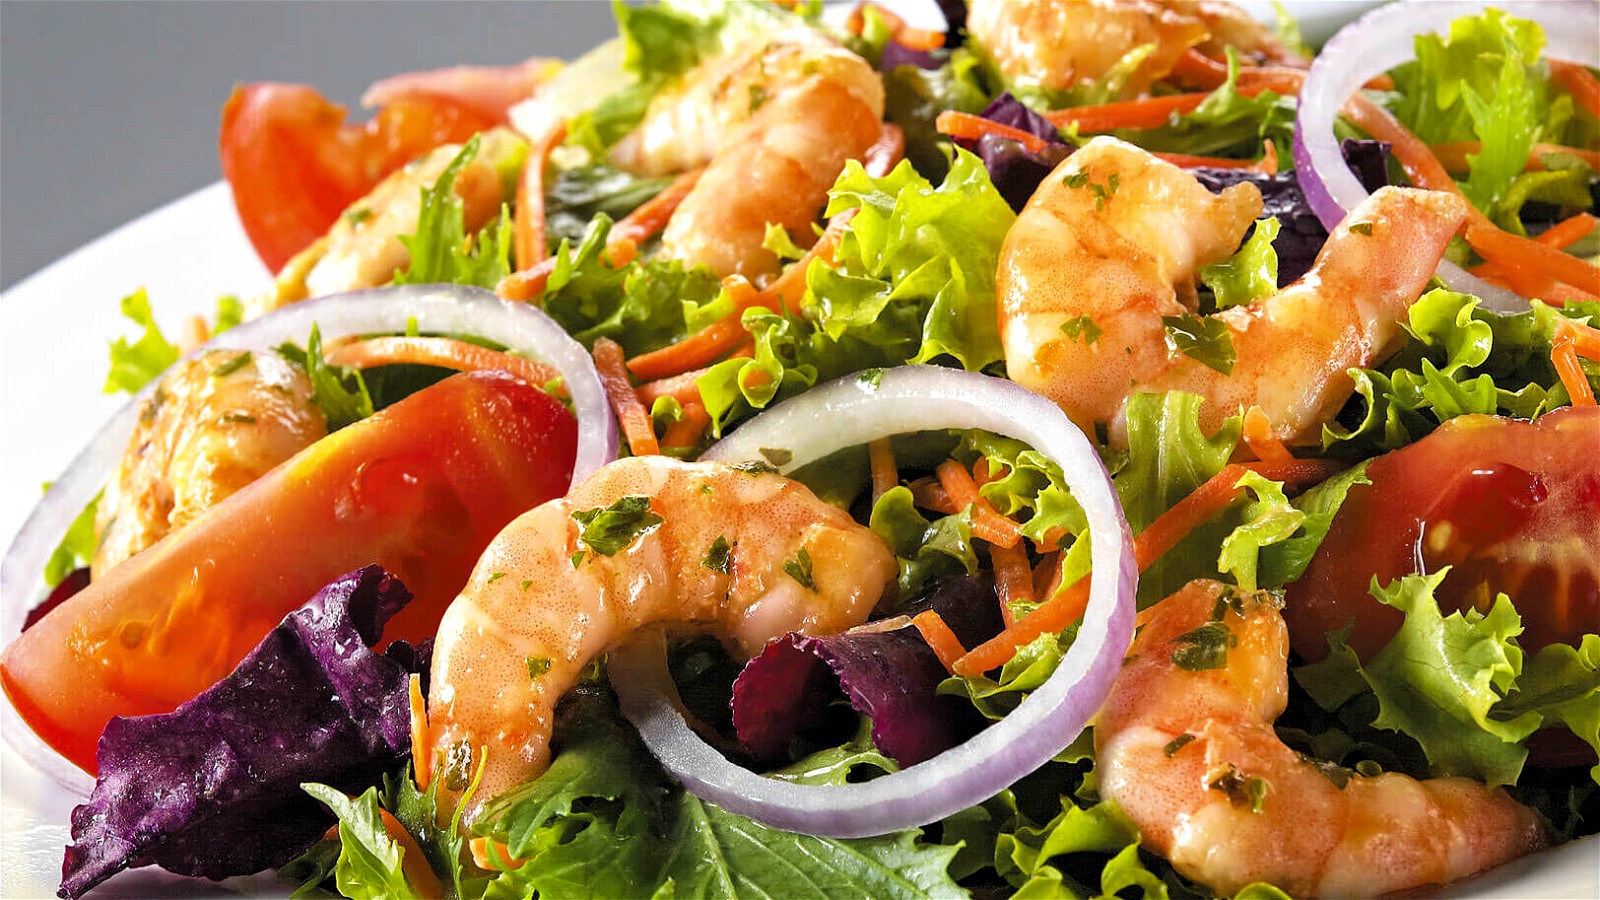 Image of Shrimp Salad with Magical Italian Dressing